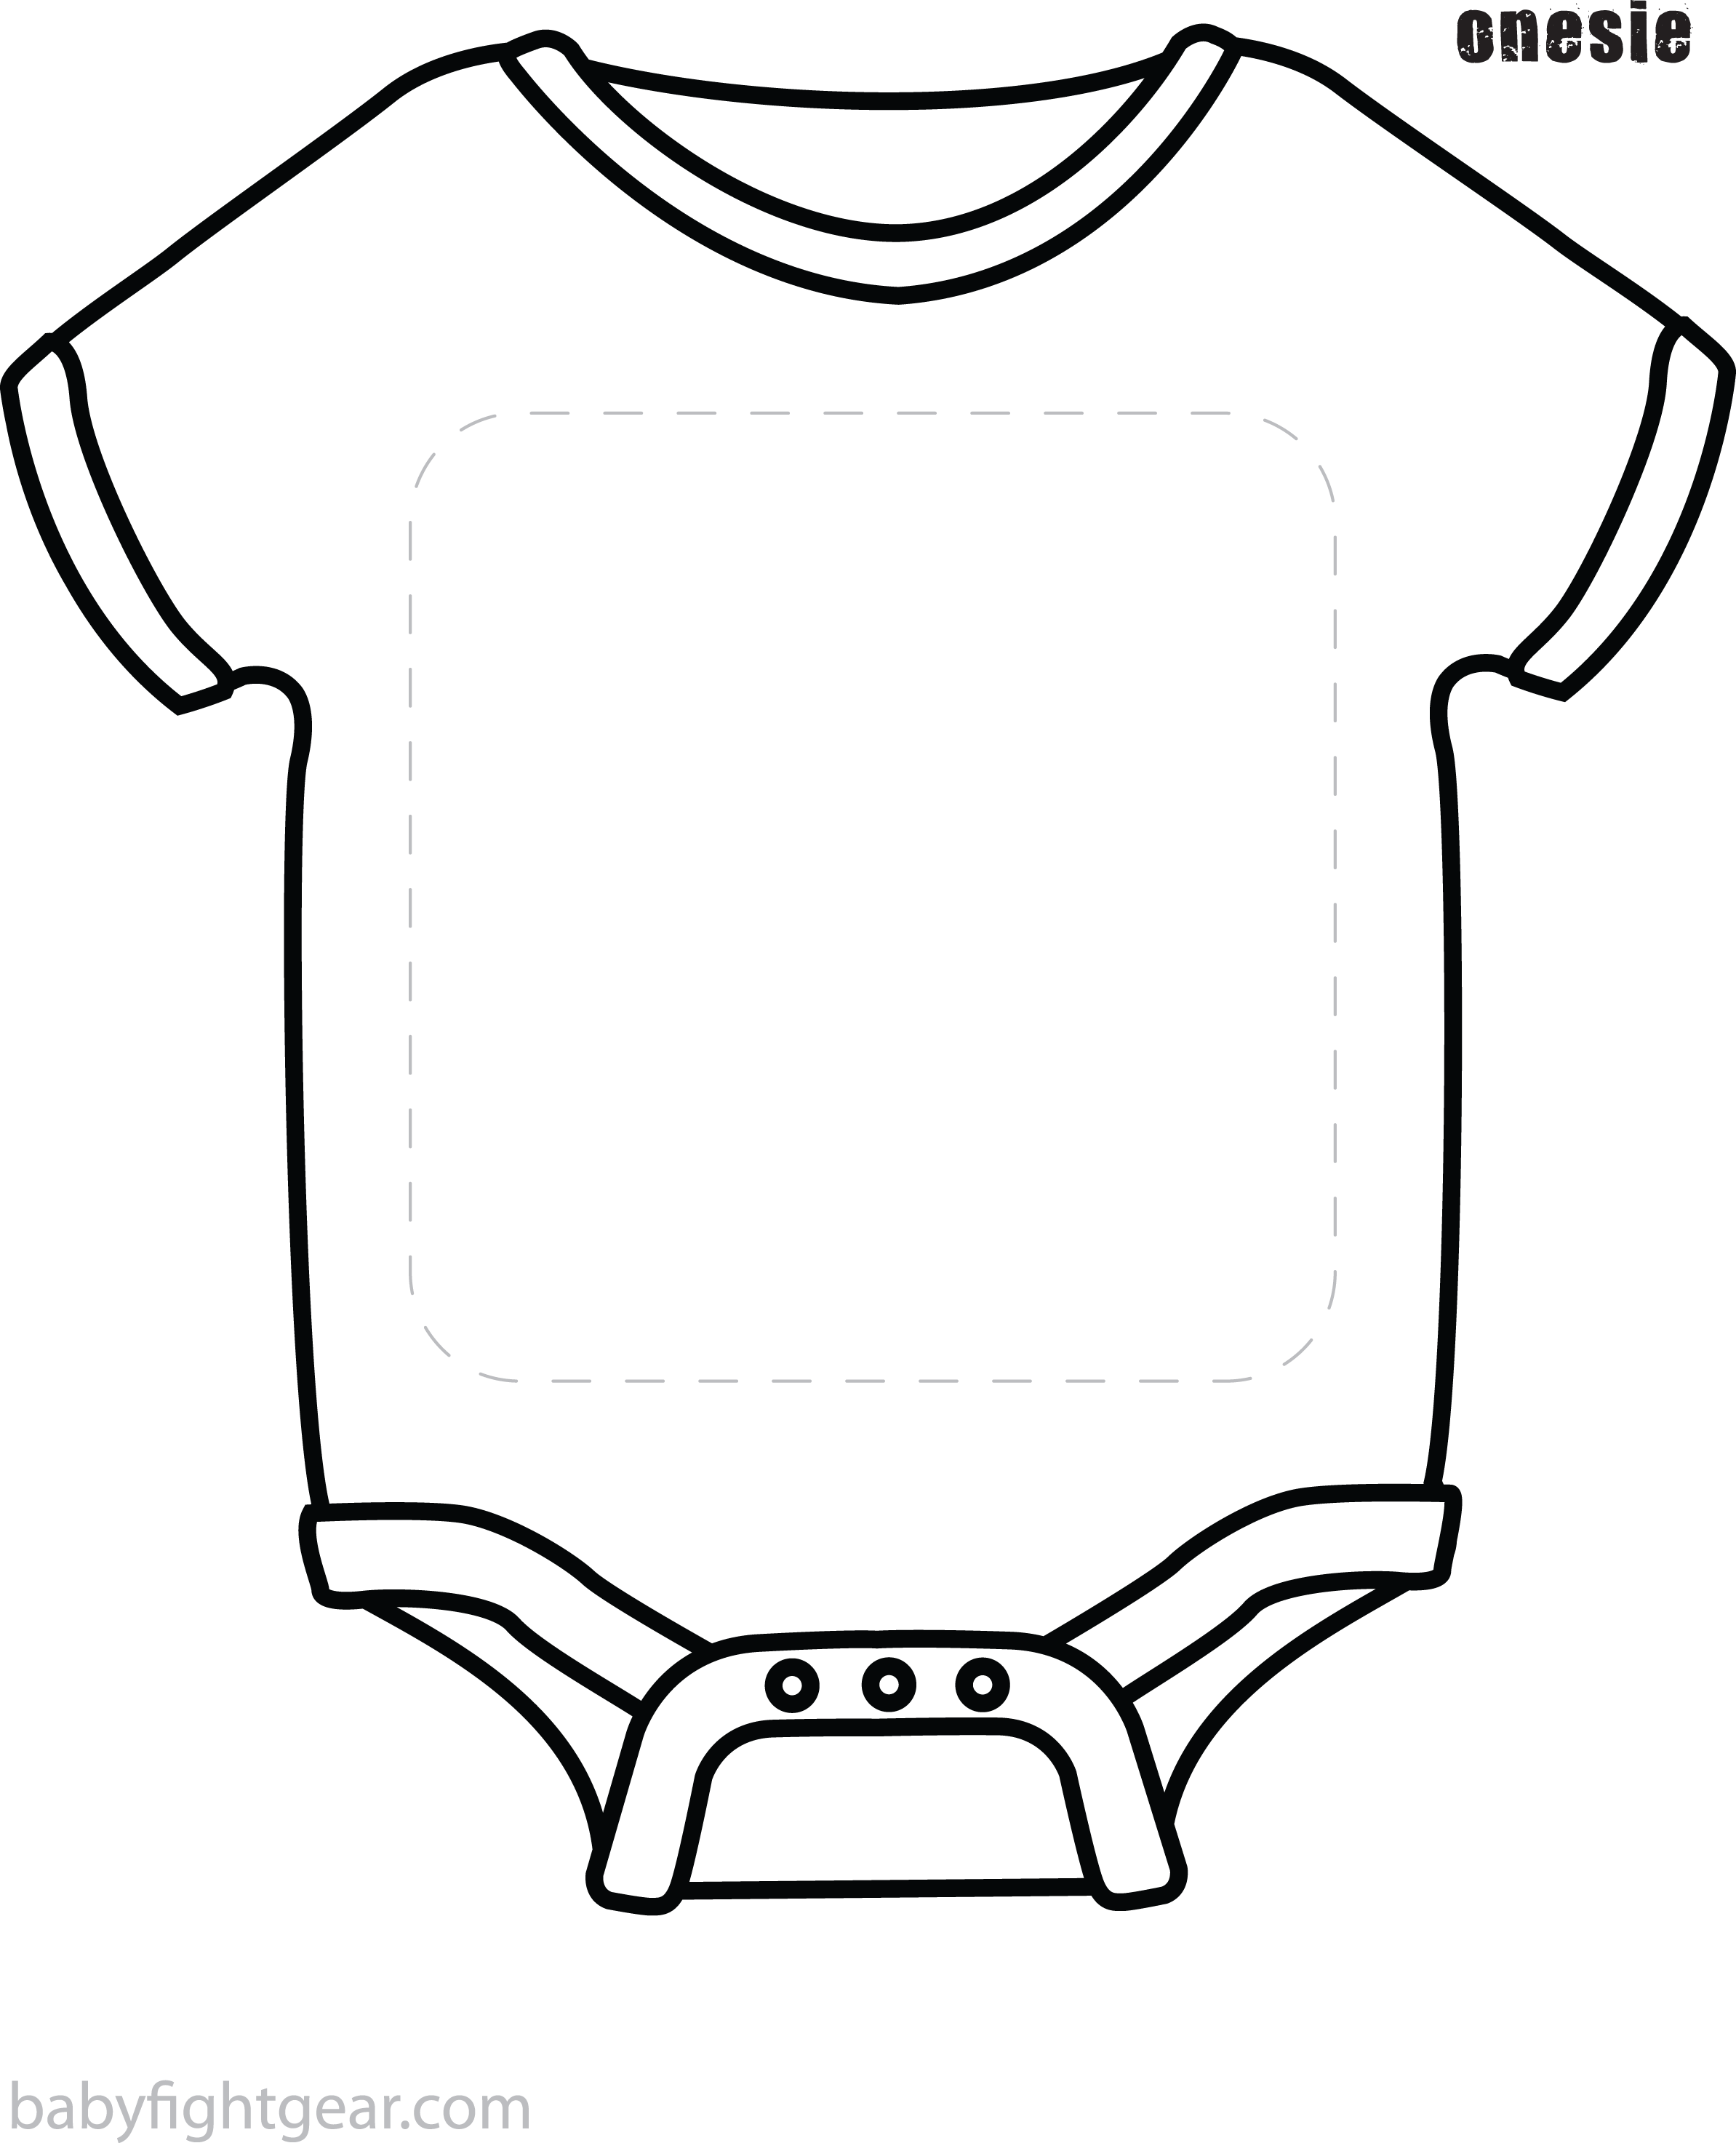 Create the first design for Chael Sonnen's signature line of baby ...